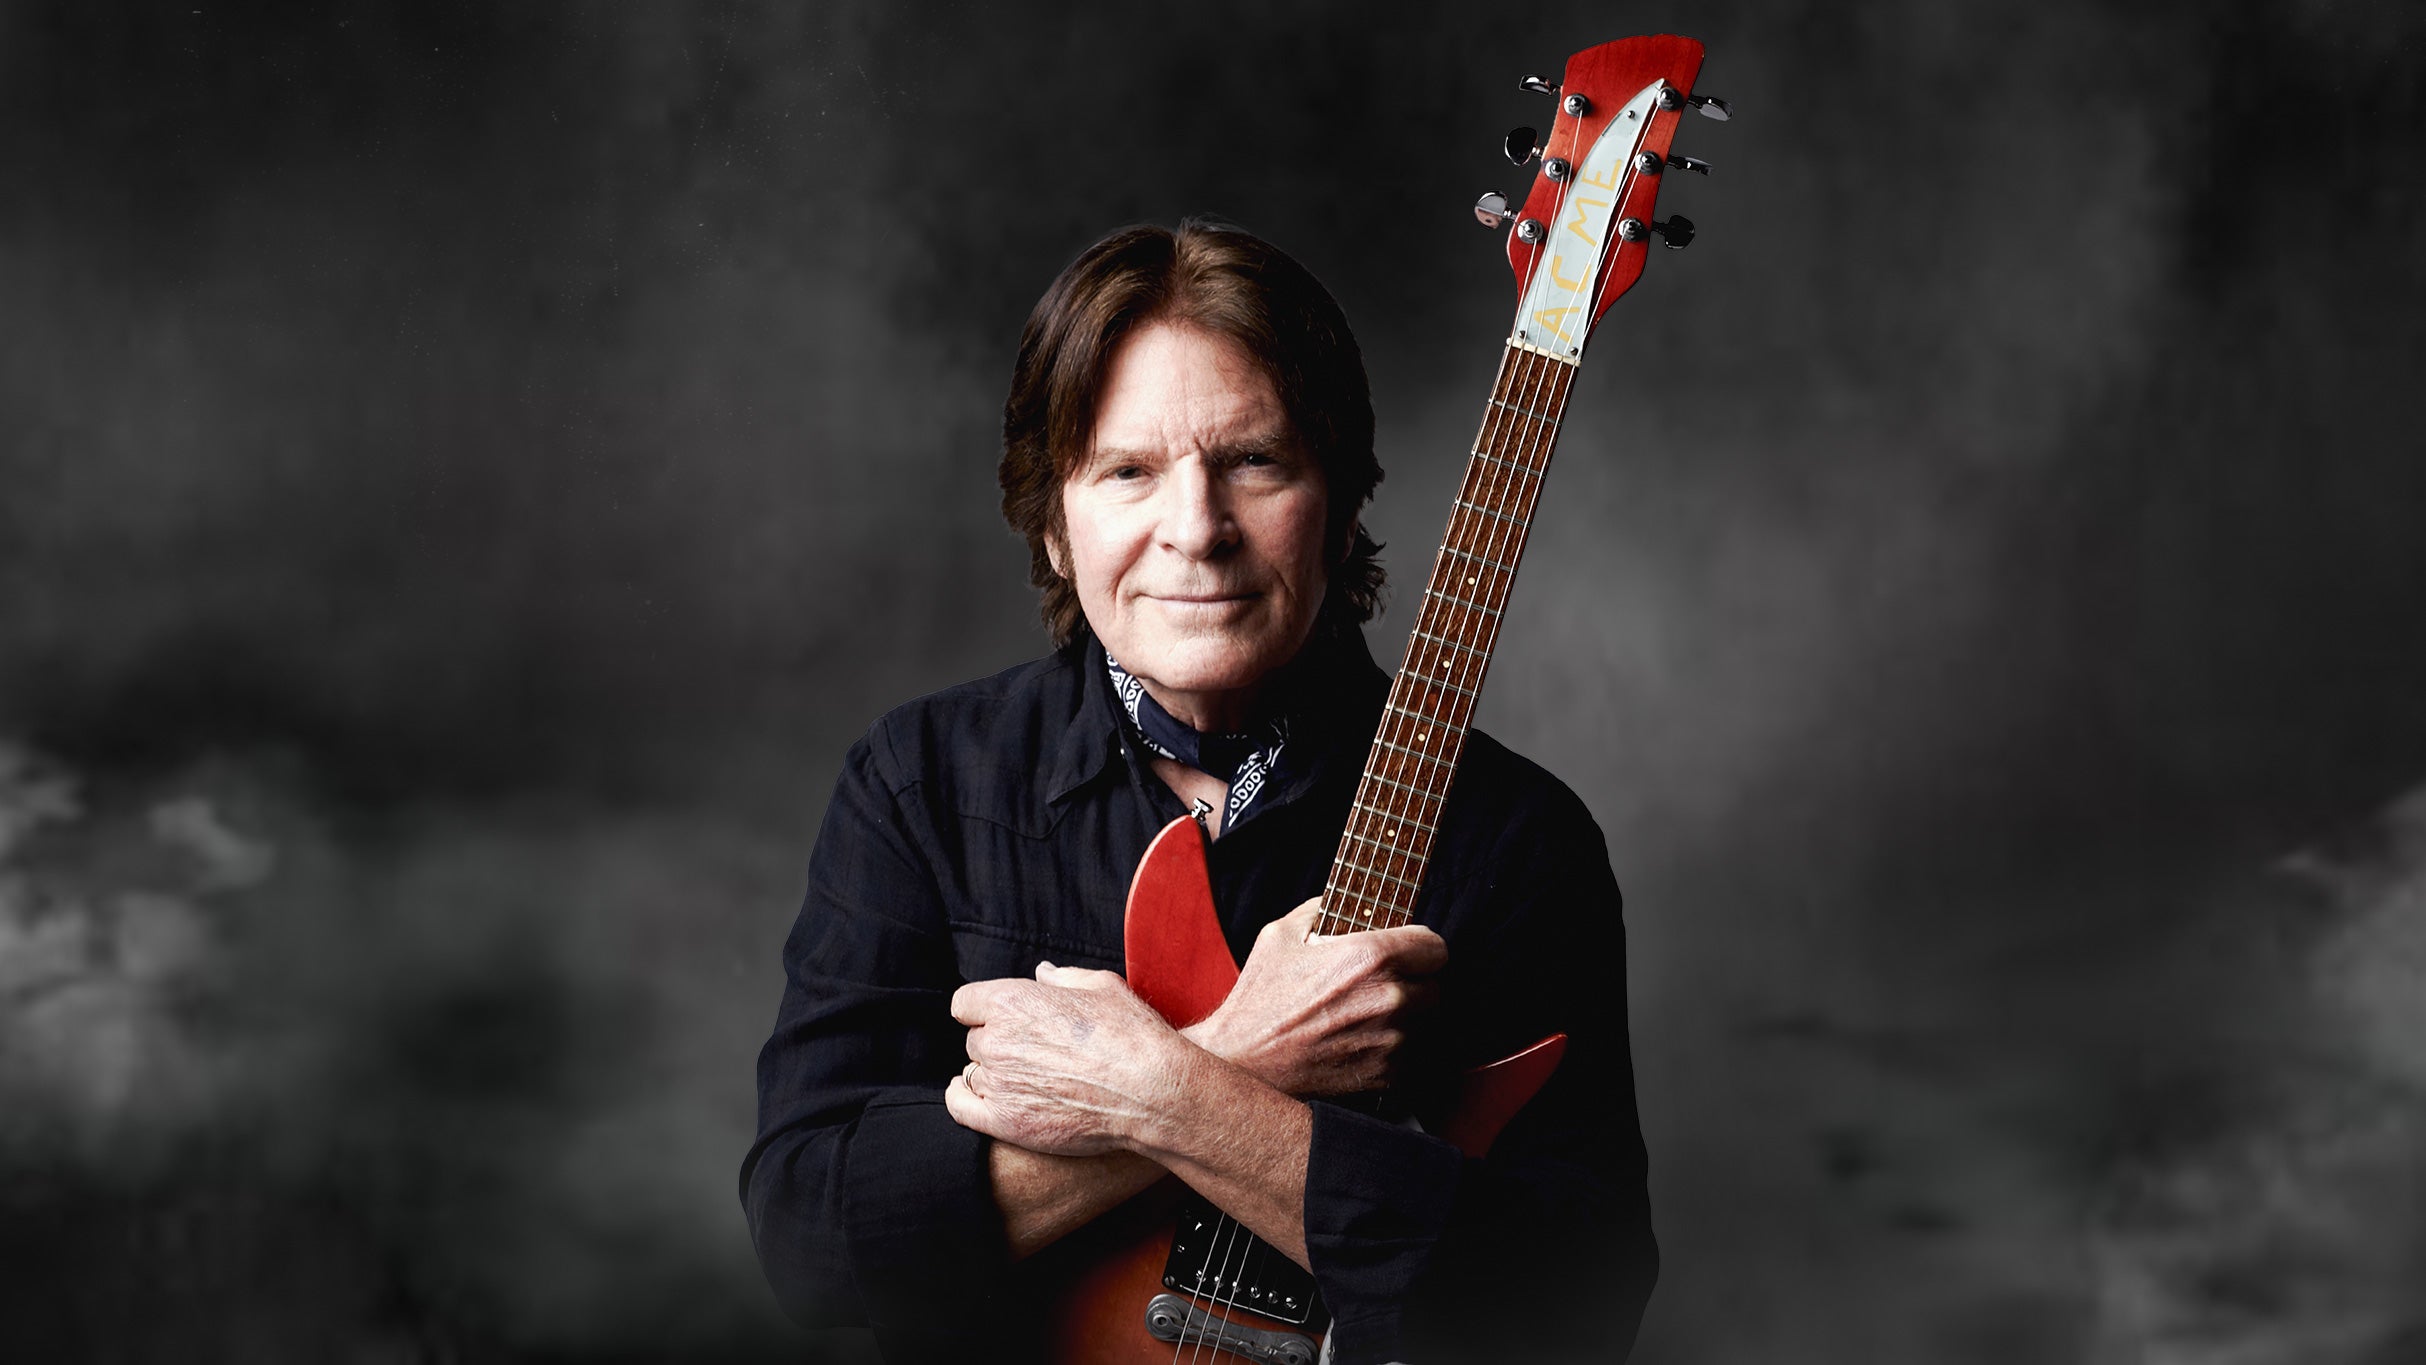 16 Facts About John Fogerty - Facts.net